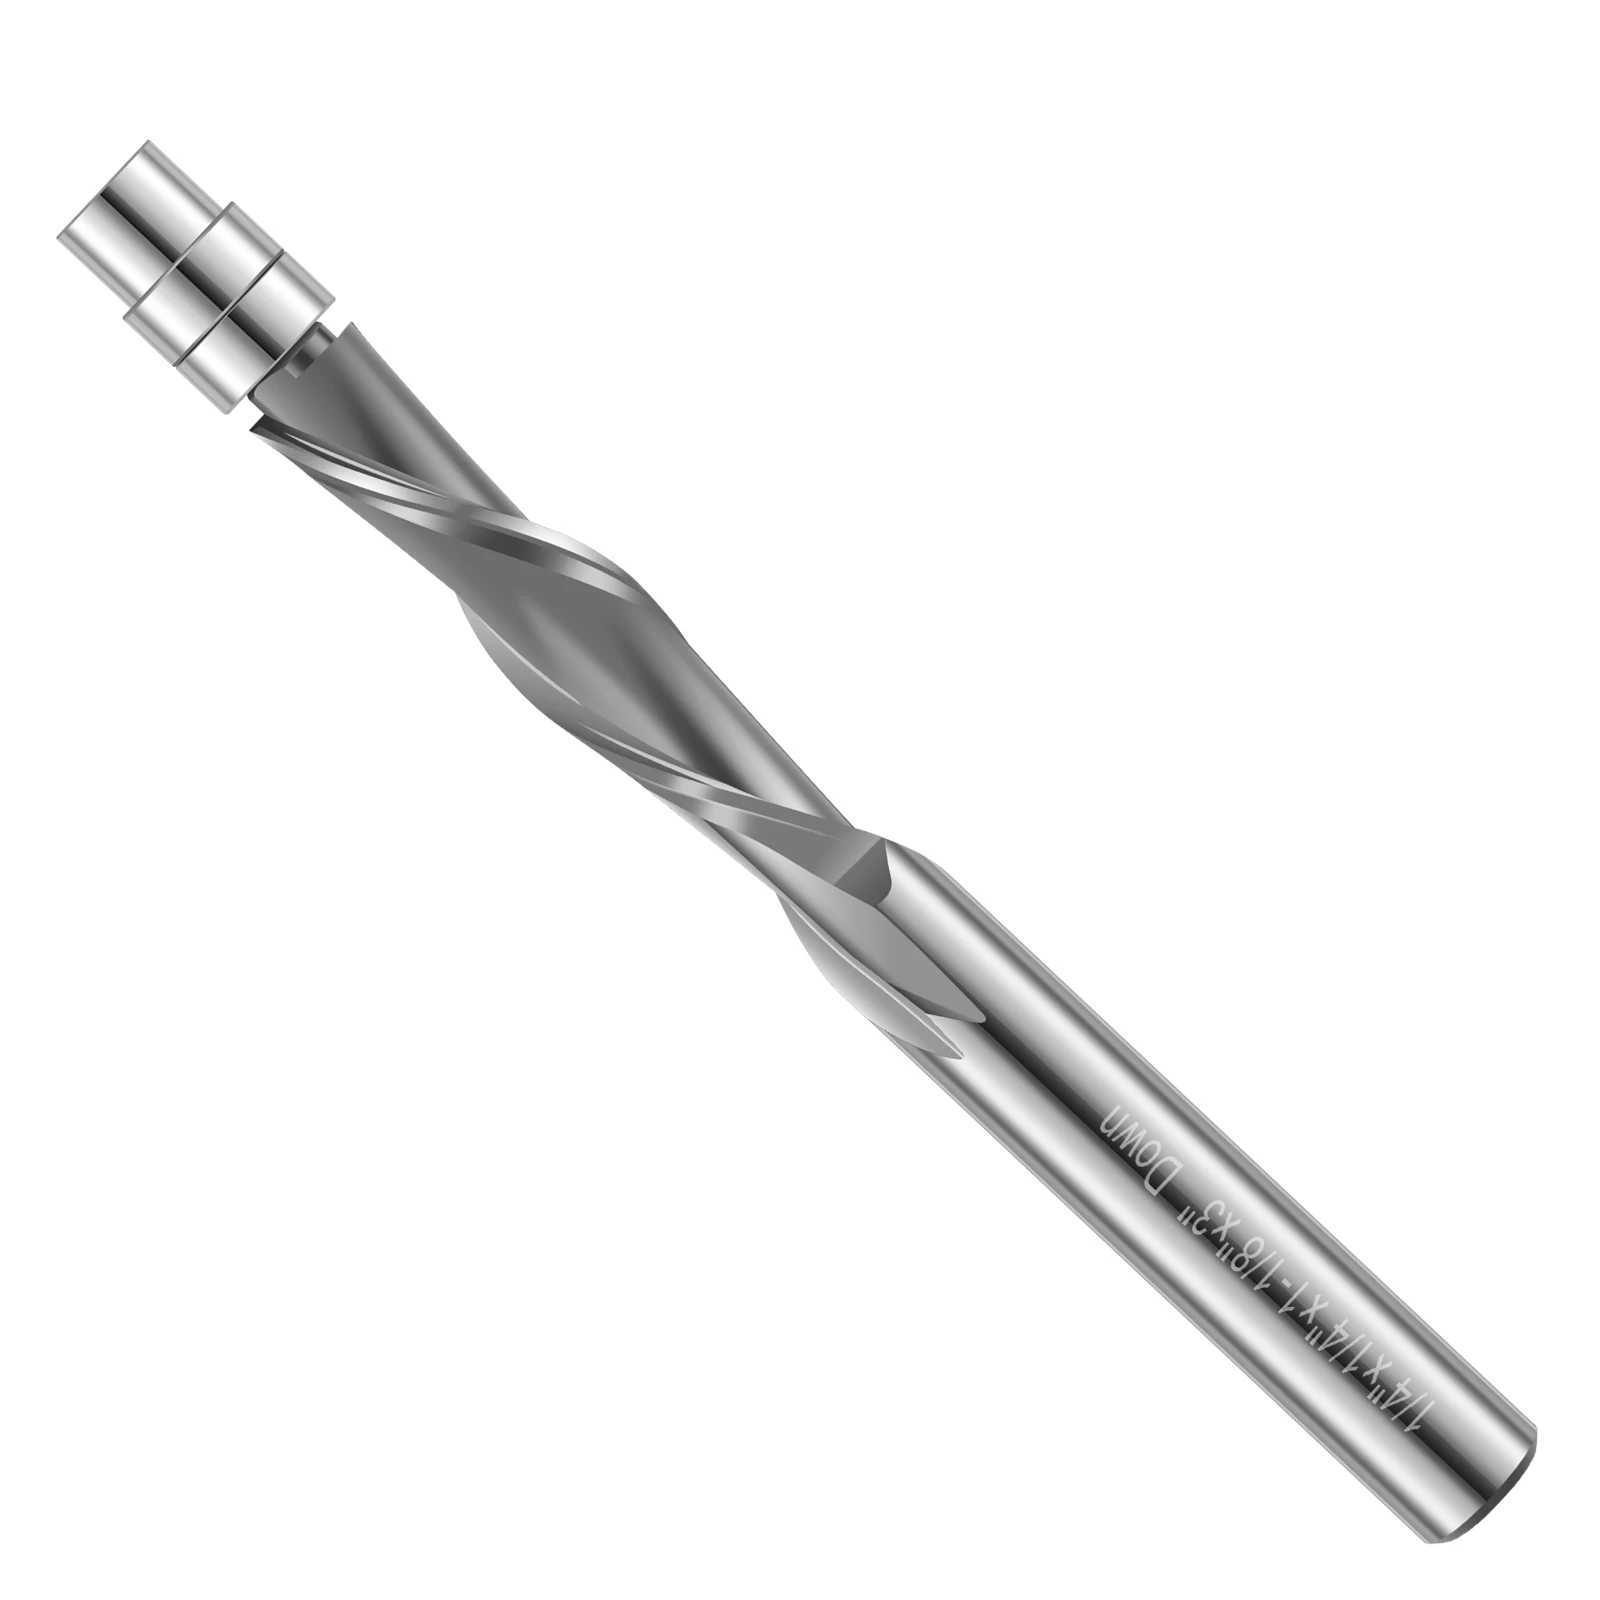 

Downcut Spiral Flush Trim Router Bit Sturdy Carbide Flush Cut Router Bit with 1/4inch Shank Double Bearing 1-1/8 Inch Cutting